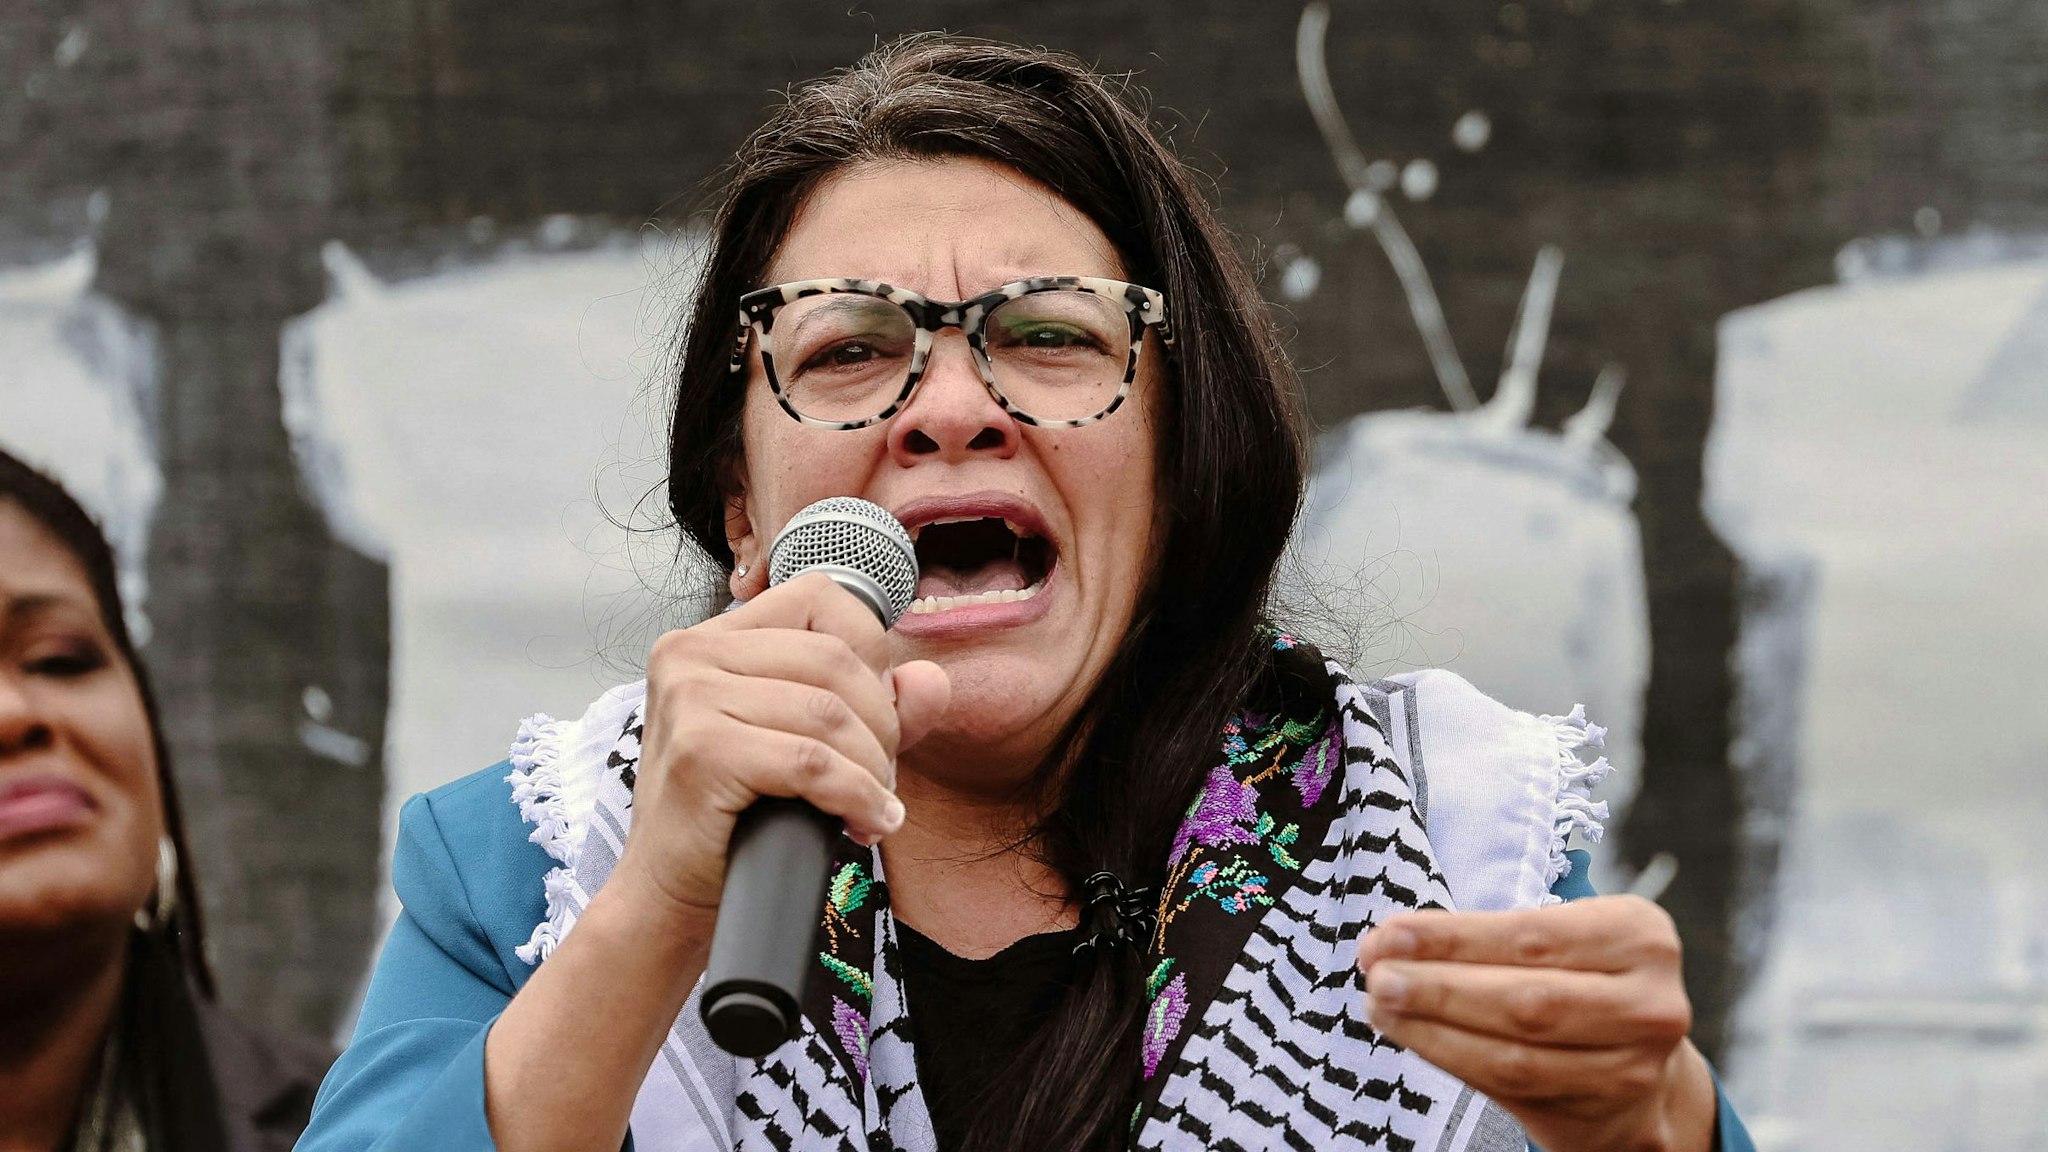 10/20/2023, Washington, DC, united states. Rep. Rashida Tlaib delivers a passionate speech, emphasizing the necessity of a ceasefire in Gaza during a rally at the U.S. Capitol. Thousands of demonstrators convened to urge a ceasefire in Gaza, with Representative Cori Bush (D-MO) visible on stage in the background